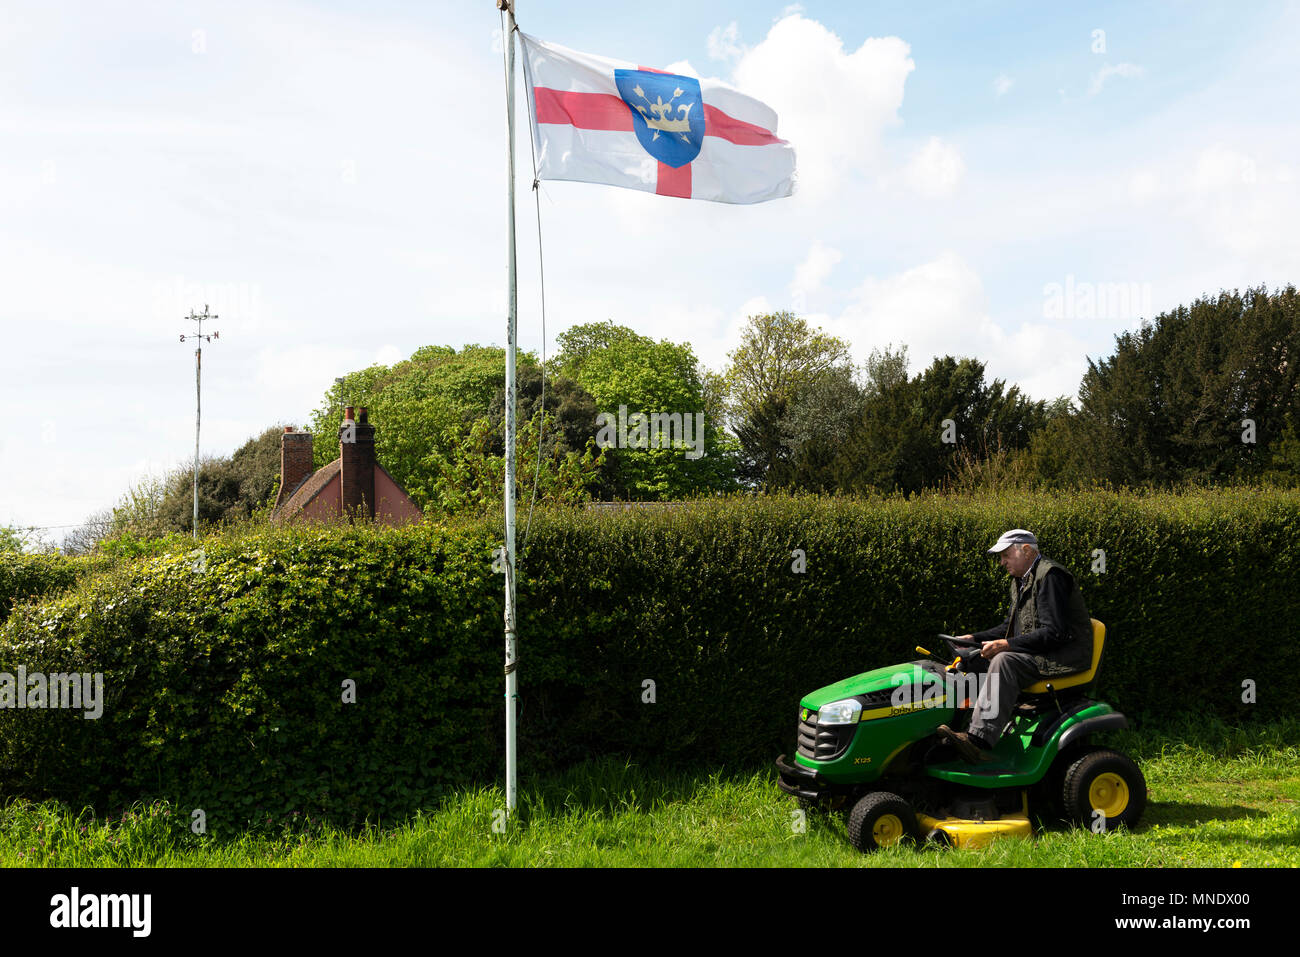 Old age pensioner using a ride-on lawn mower, Bawdsey, Suffolk, England. Stock Photo